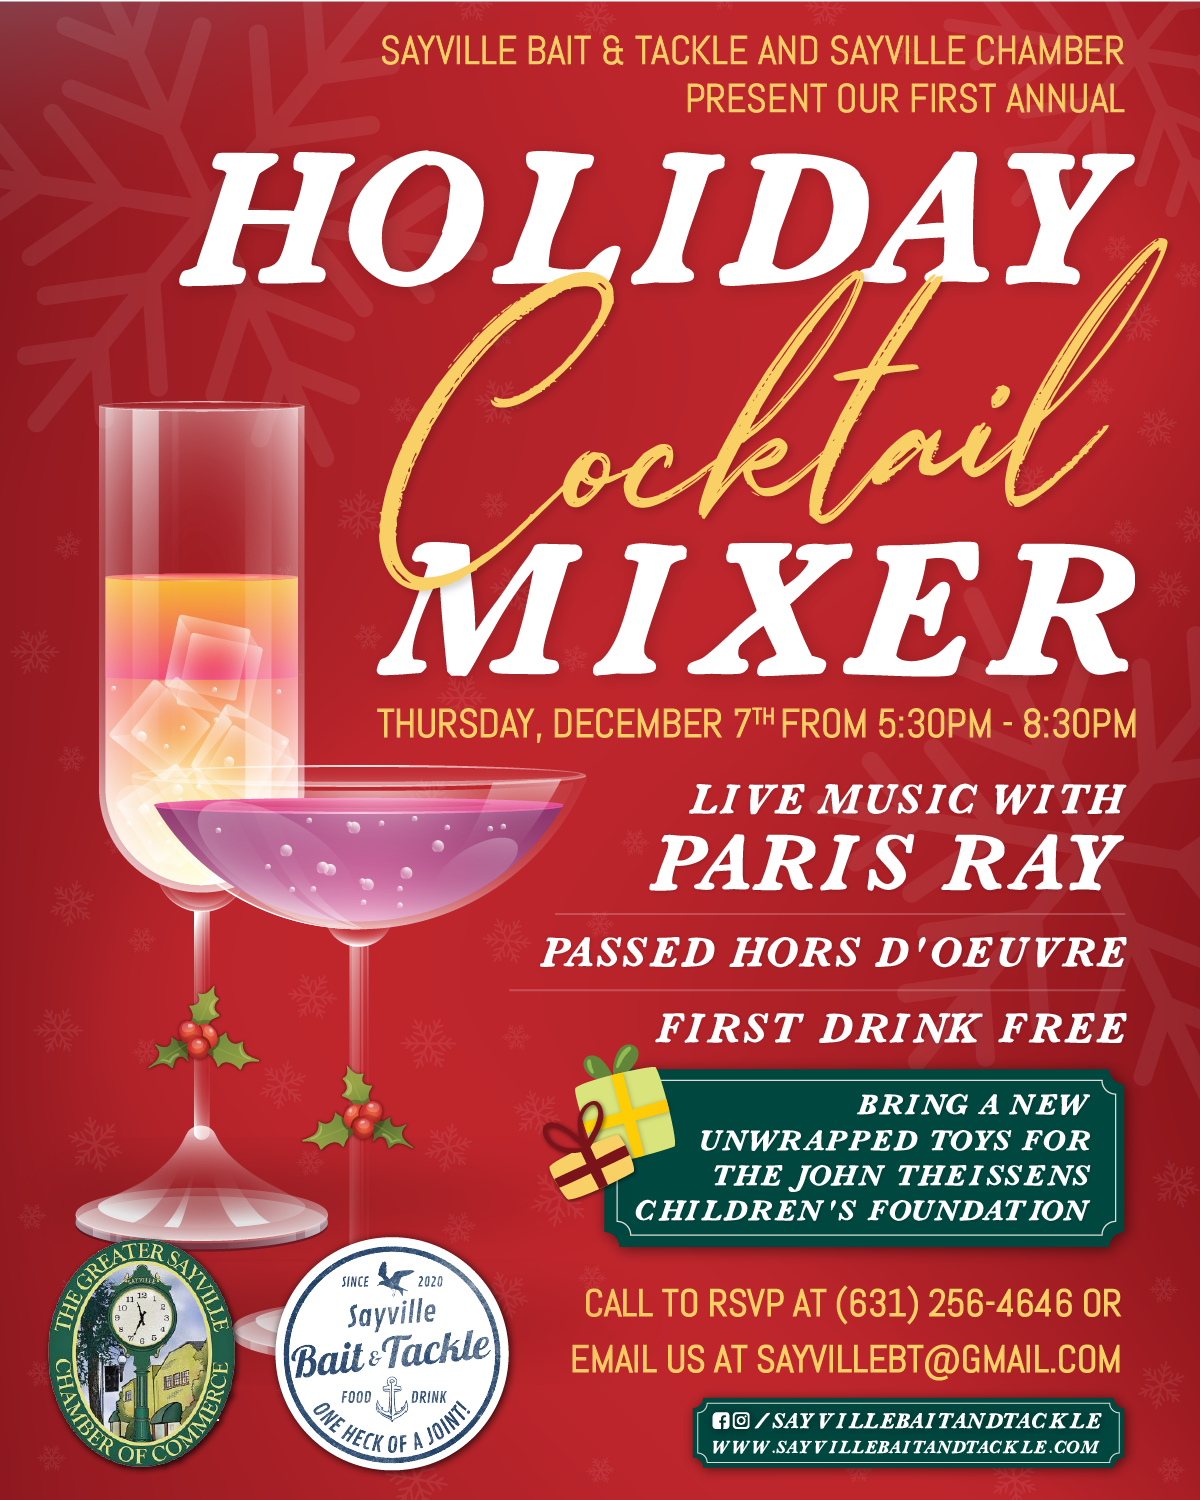 First Annual Holiday Cocktail Mixer — Sayville Bait & Tackle